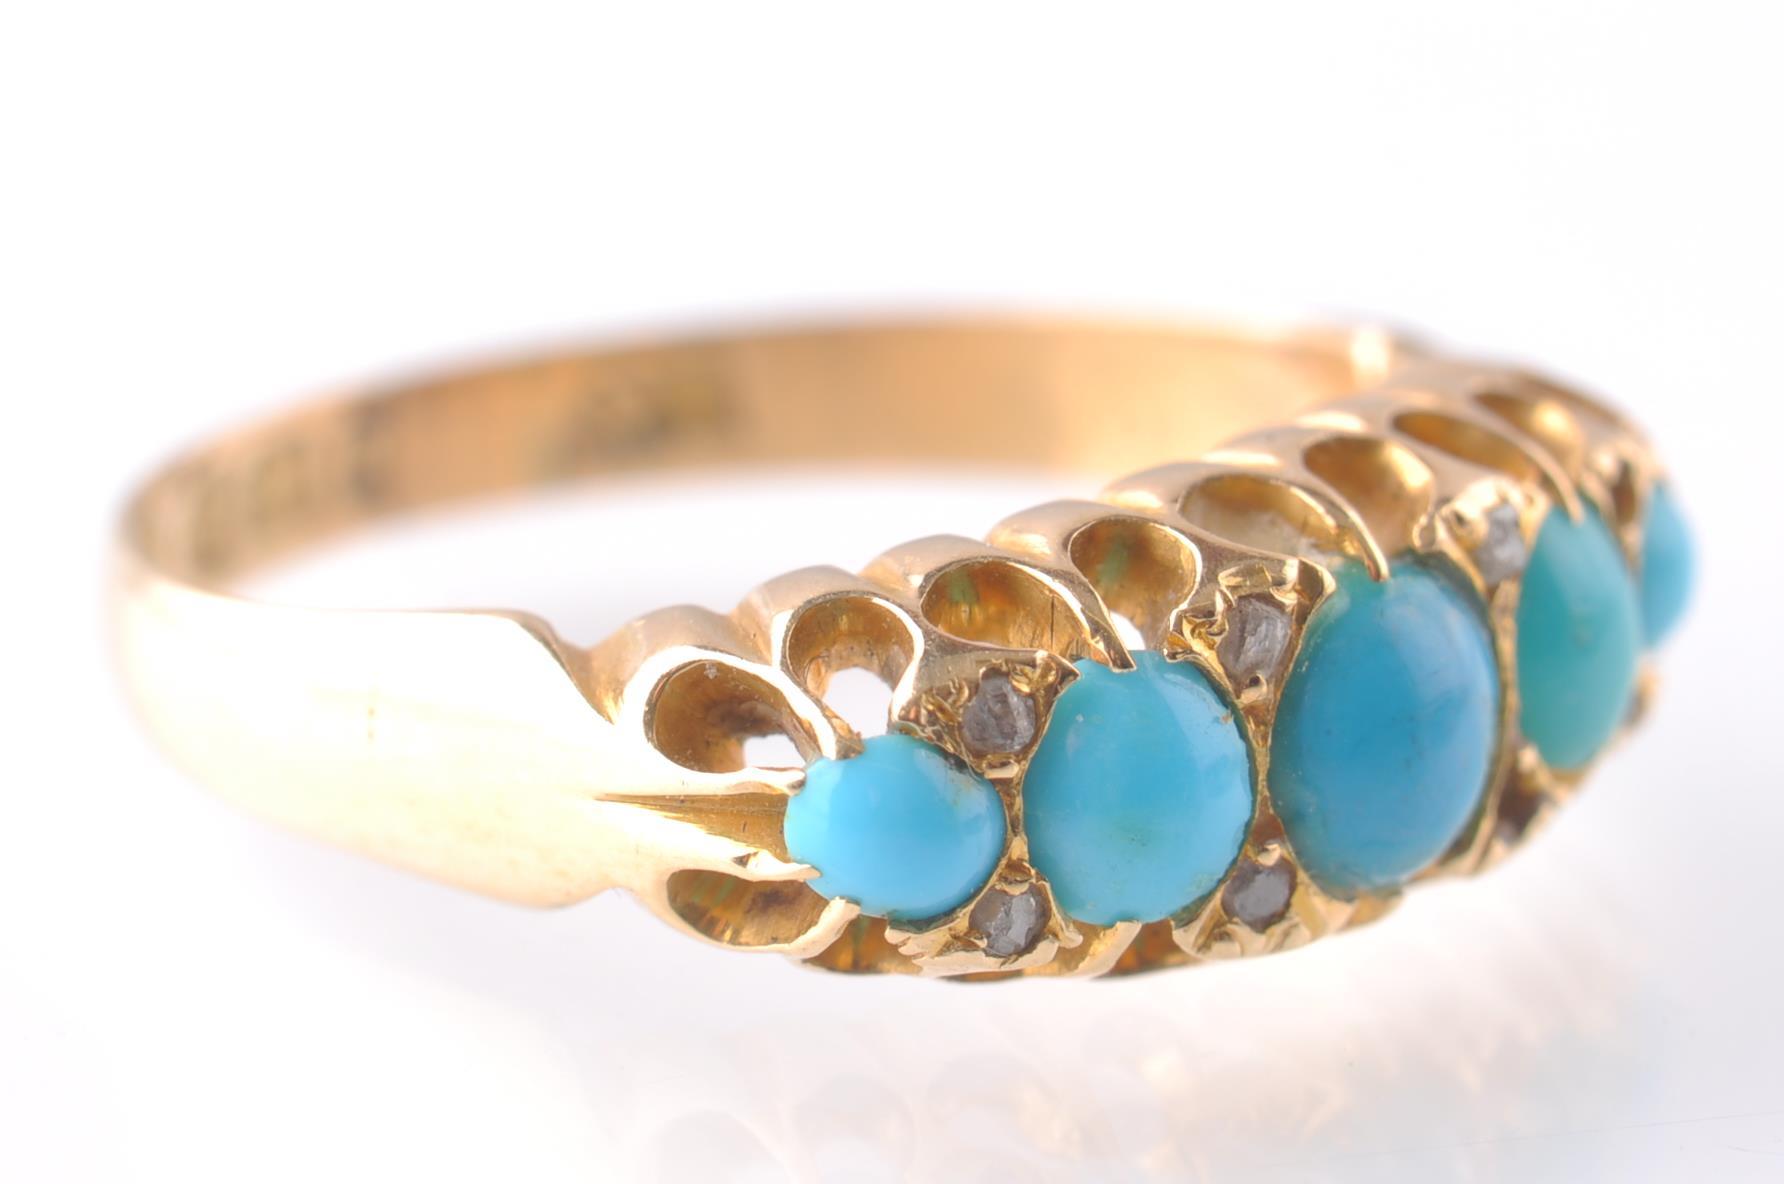 An 18CT GOLD & TURQUOISE GYPSY RING - 1915 - Image 3 of 4